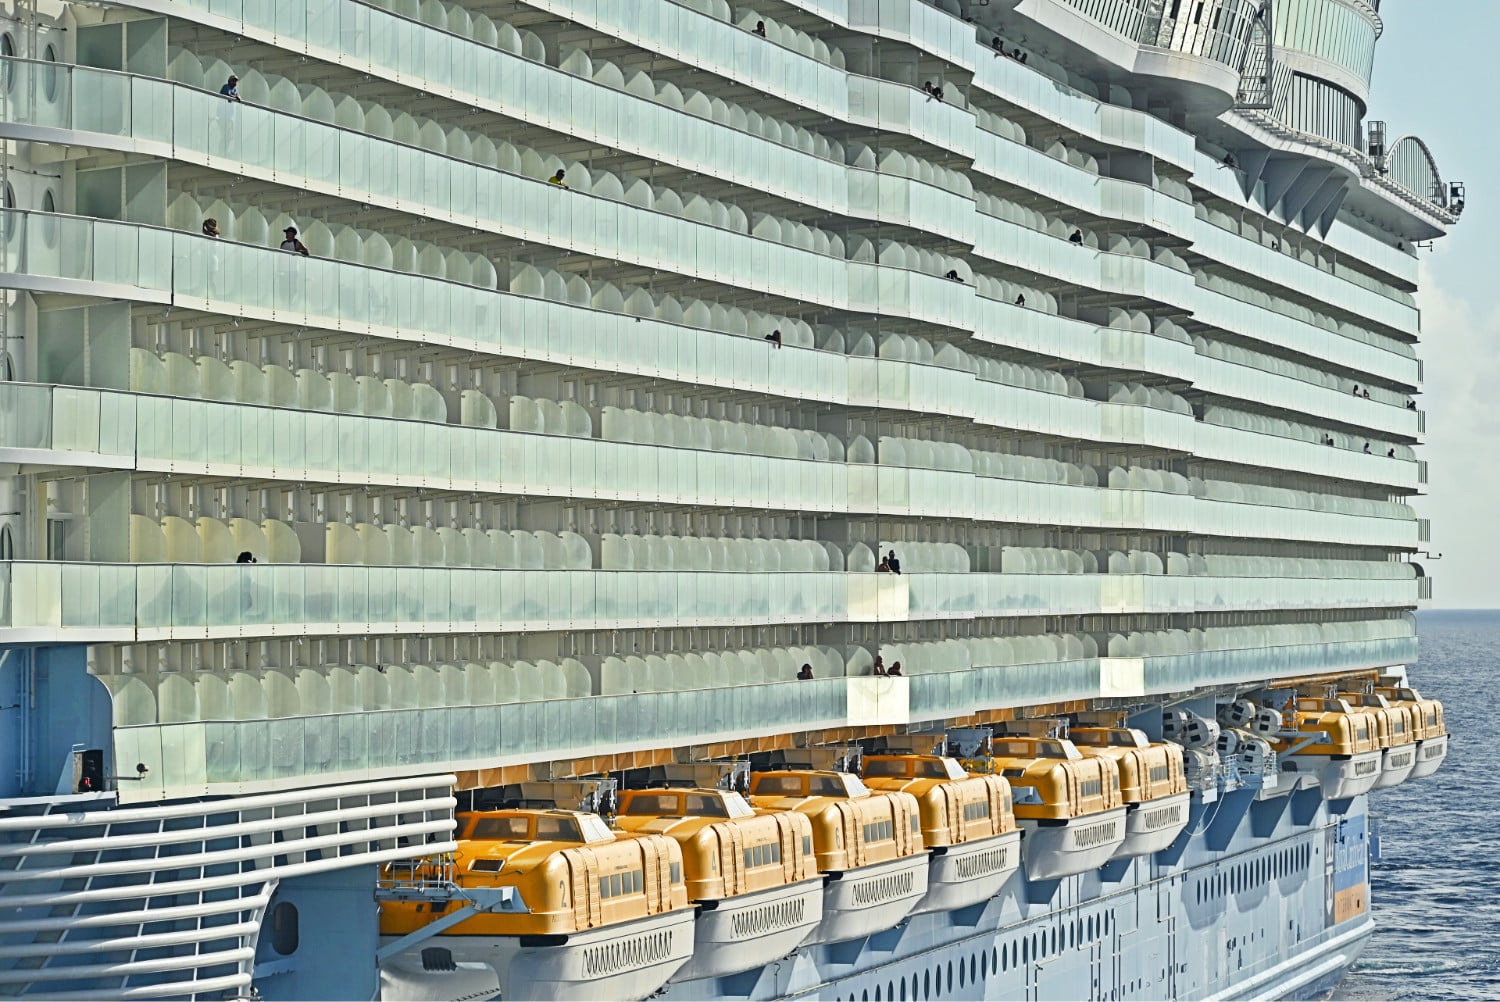 Allure of the Seas, Royal Caribbean cruise ship from side view